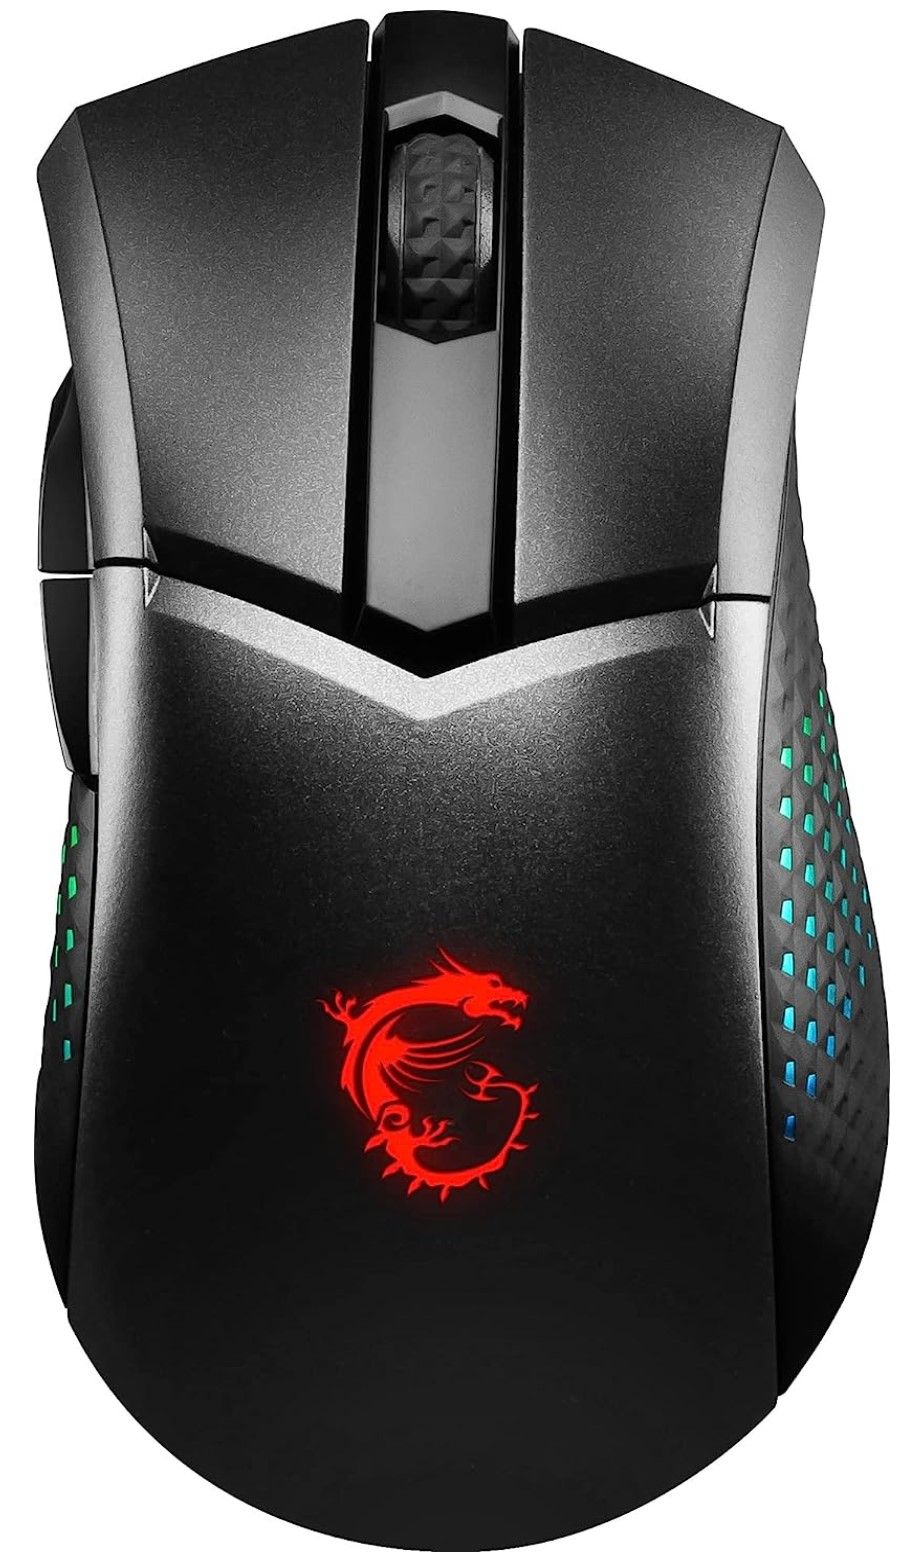 MSI Clutch GM51 Wireless Mouse is shown